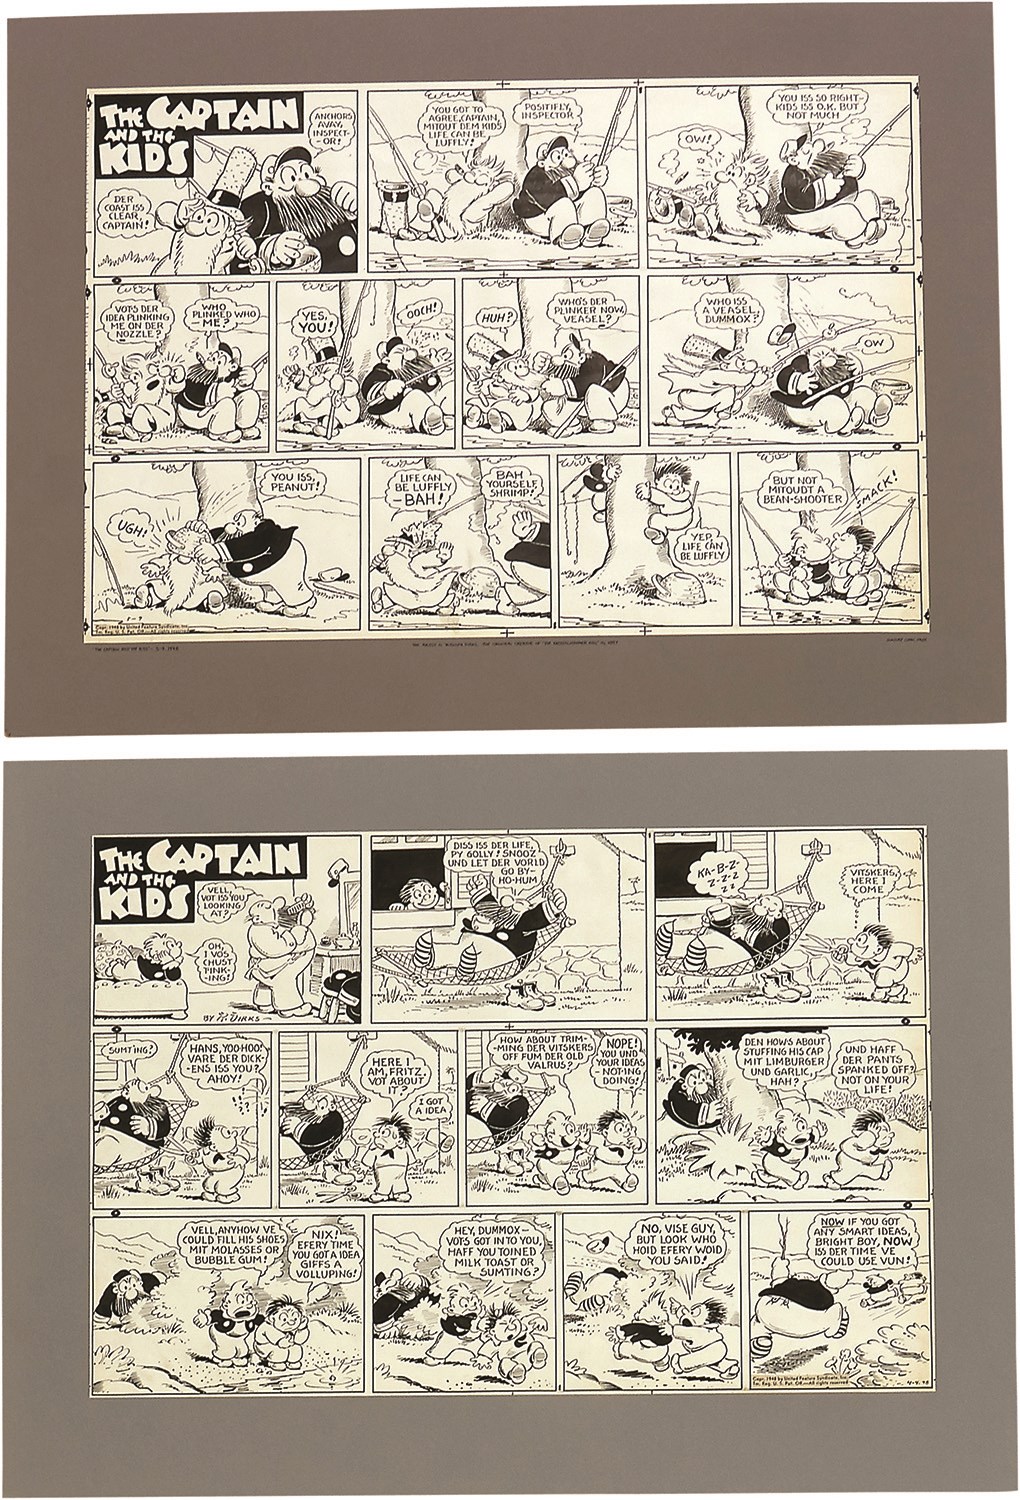 Two 1948 Captain and the Kids Sunday Page Original Art